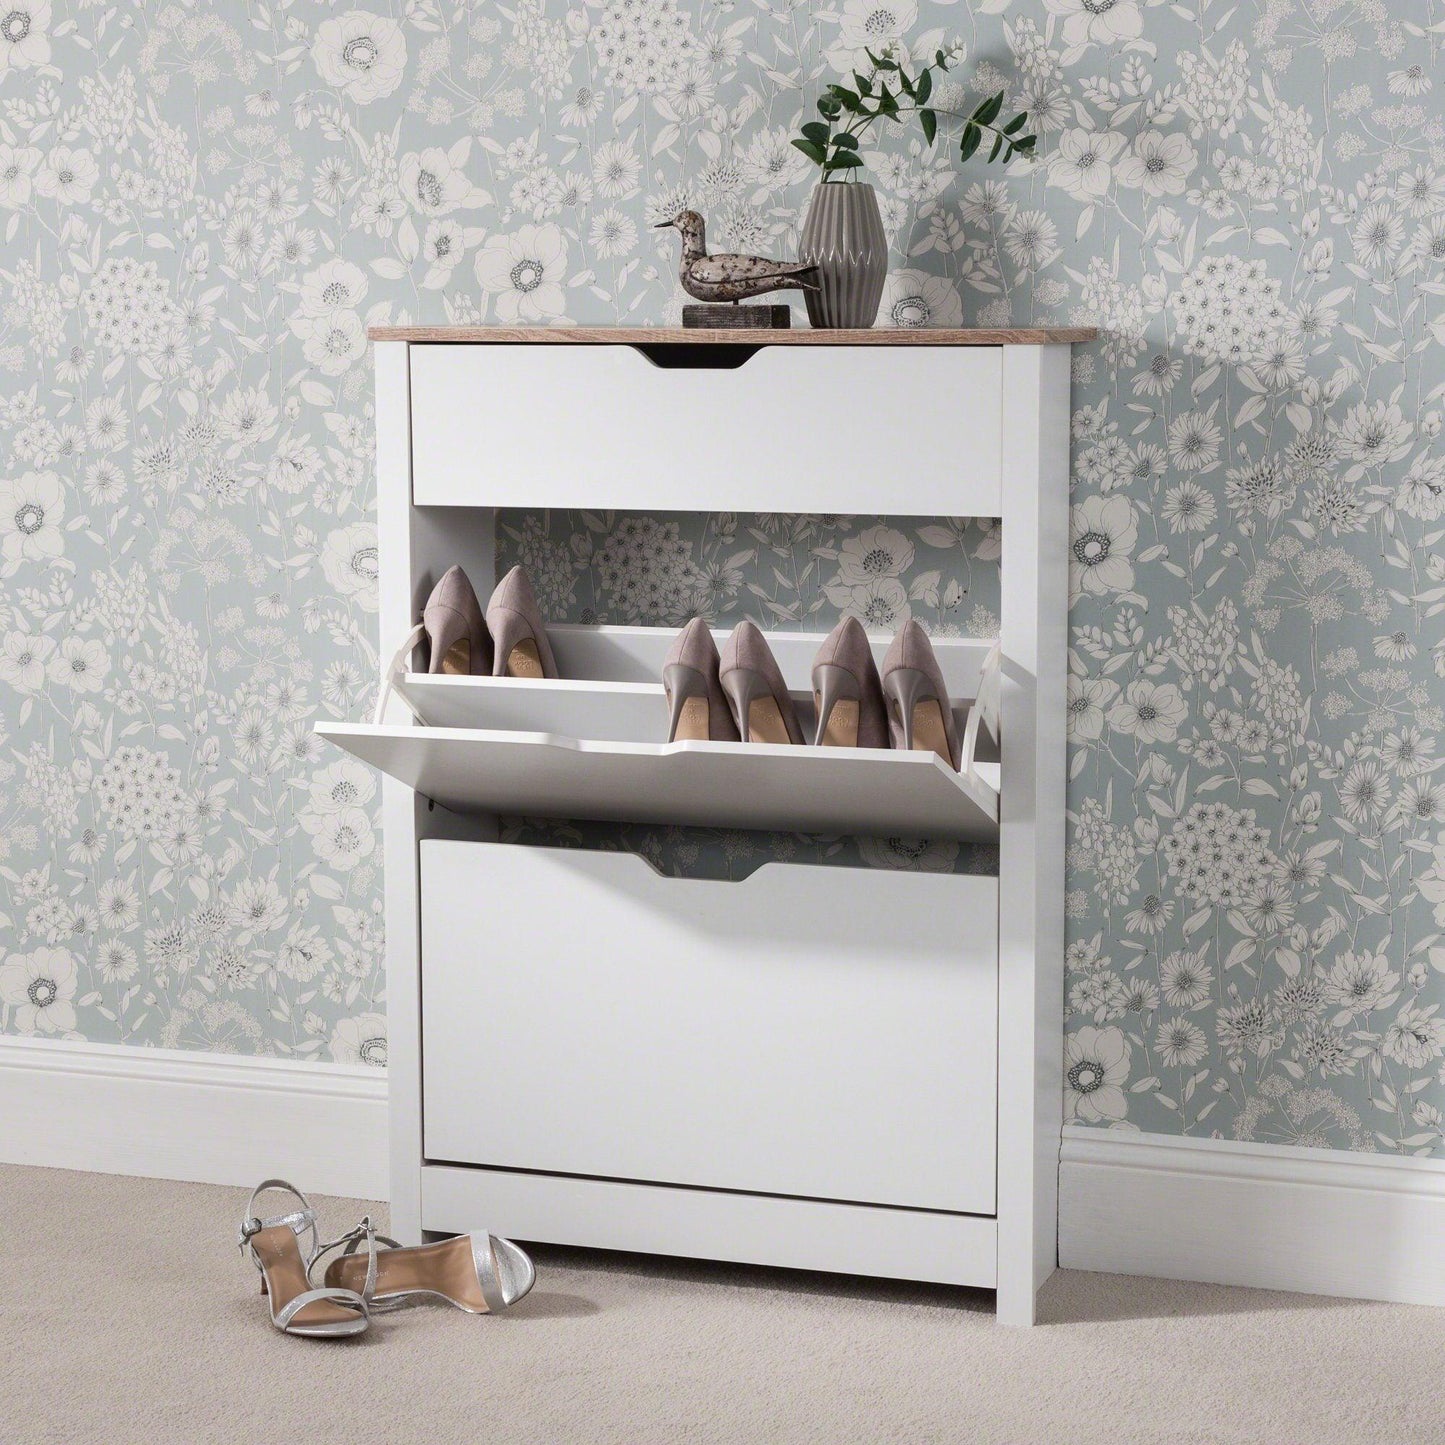 Shoe Cabinet Storage Wooden White - In Stock Date - 19th June 2020 - Laura James